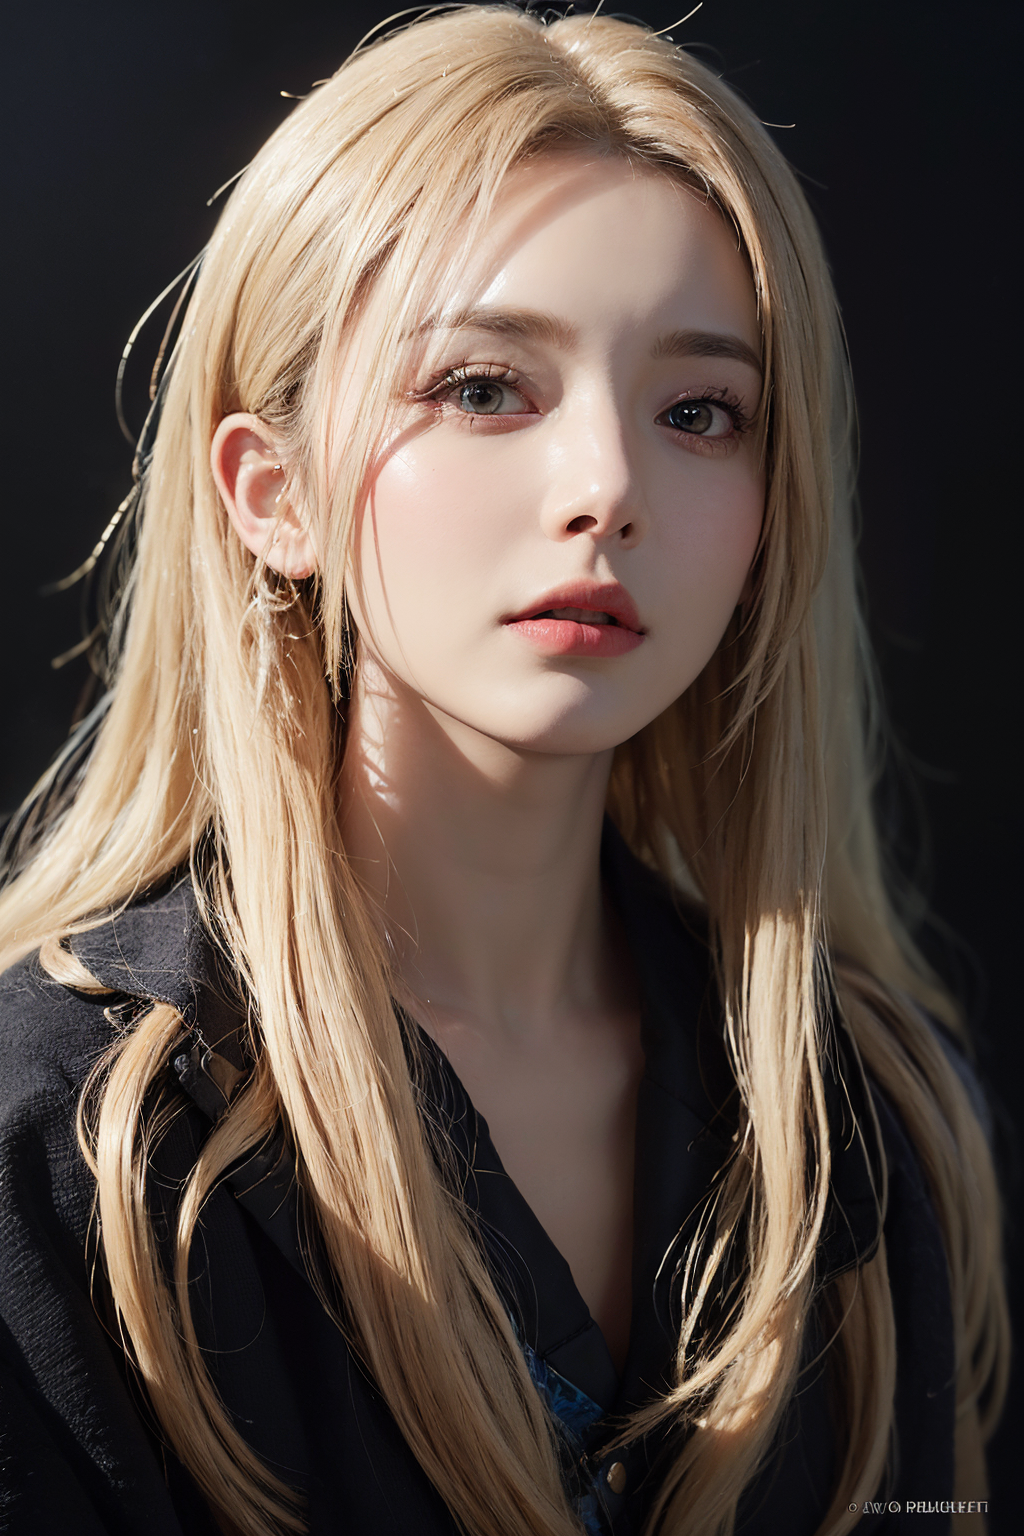 The image depicts a beautiful young woman with long blonde hair, wearing a black shirt. She is looking at the camera with a pouty expression, and her eyes are wide open. The lighting in the photo emphasizes her features, highlighting her lips and eyelashes. Her hair is falling forward, adding a touch of elegance to the scene. The woman's gaze and expression convey a sense of confidence and poise, making the image visually appealing and captivating.